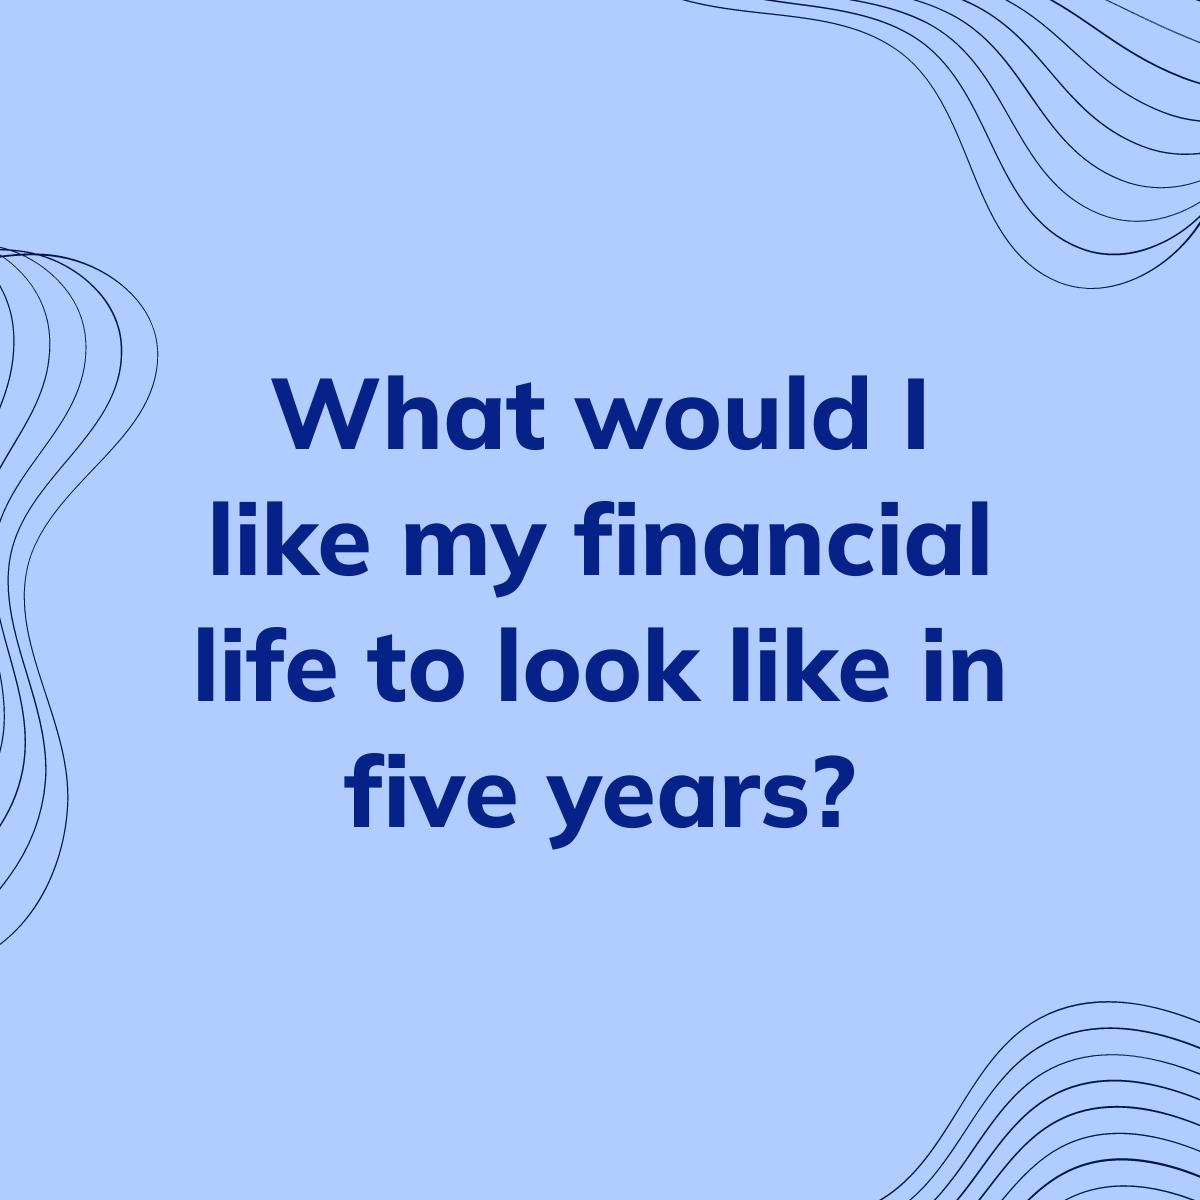 Journal Prompt: What would I like my financial life to look like in five years?